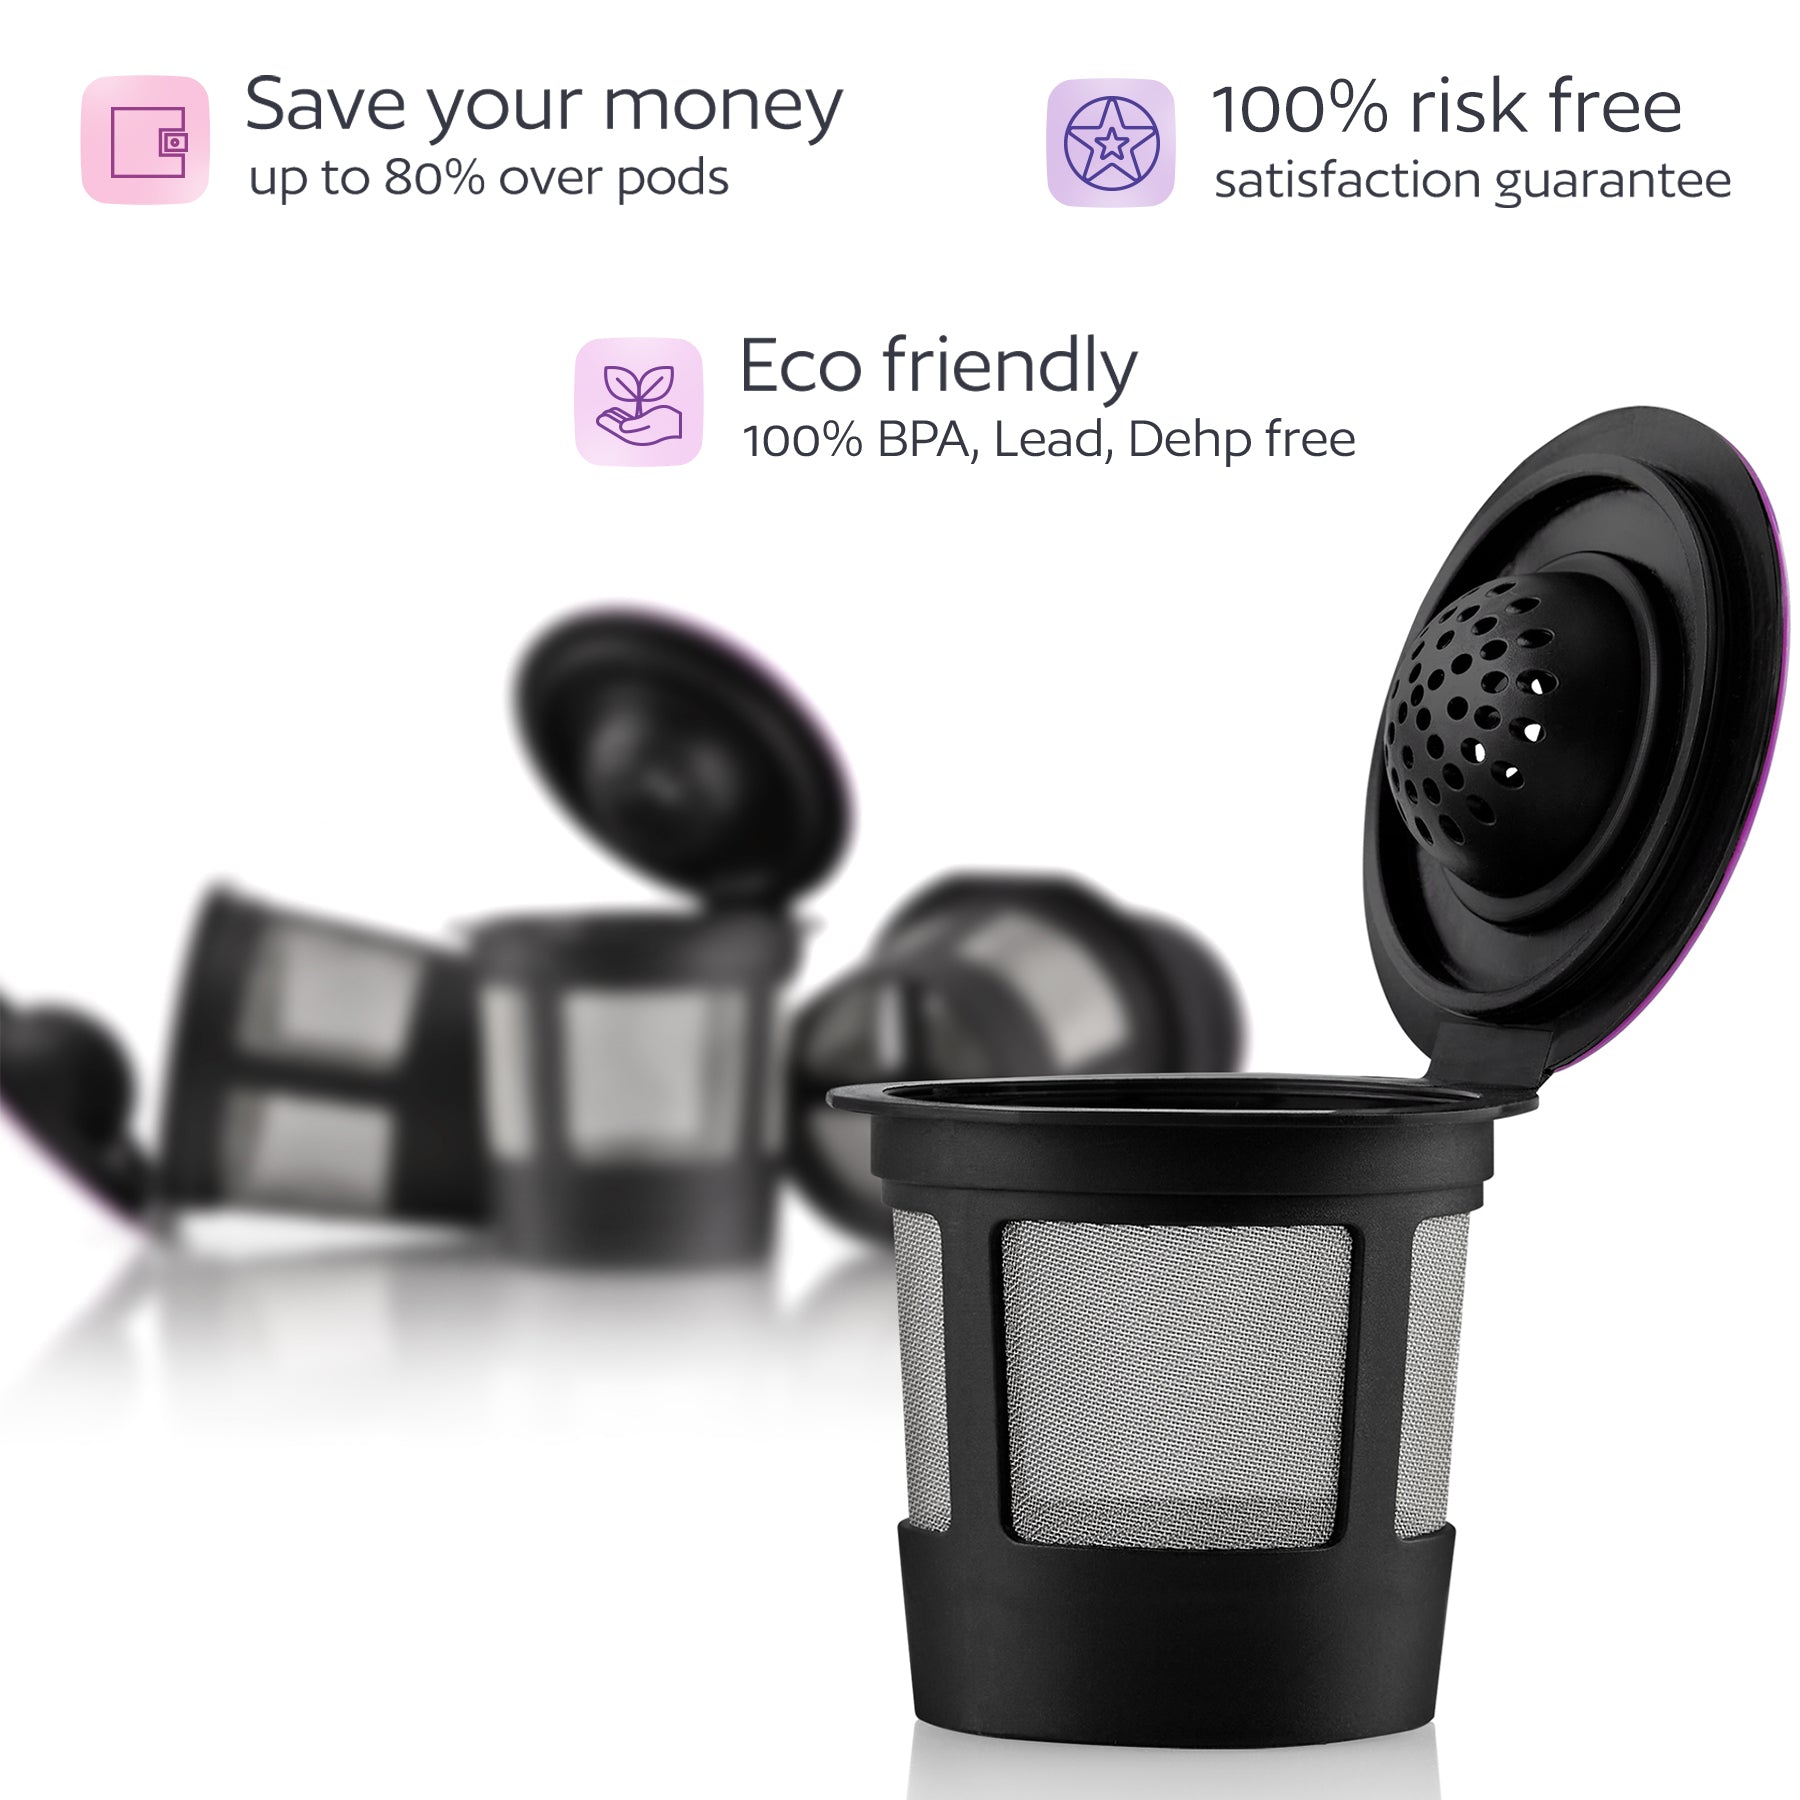 4 Black Reusable K Cups for Keurig Coffee Makers - BPA Free Universal Fit Refillable Kcups Coffee Filters for 1.0 and 2.0 Keurig Brewers